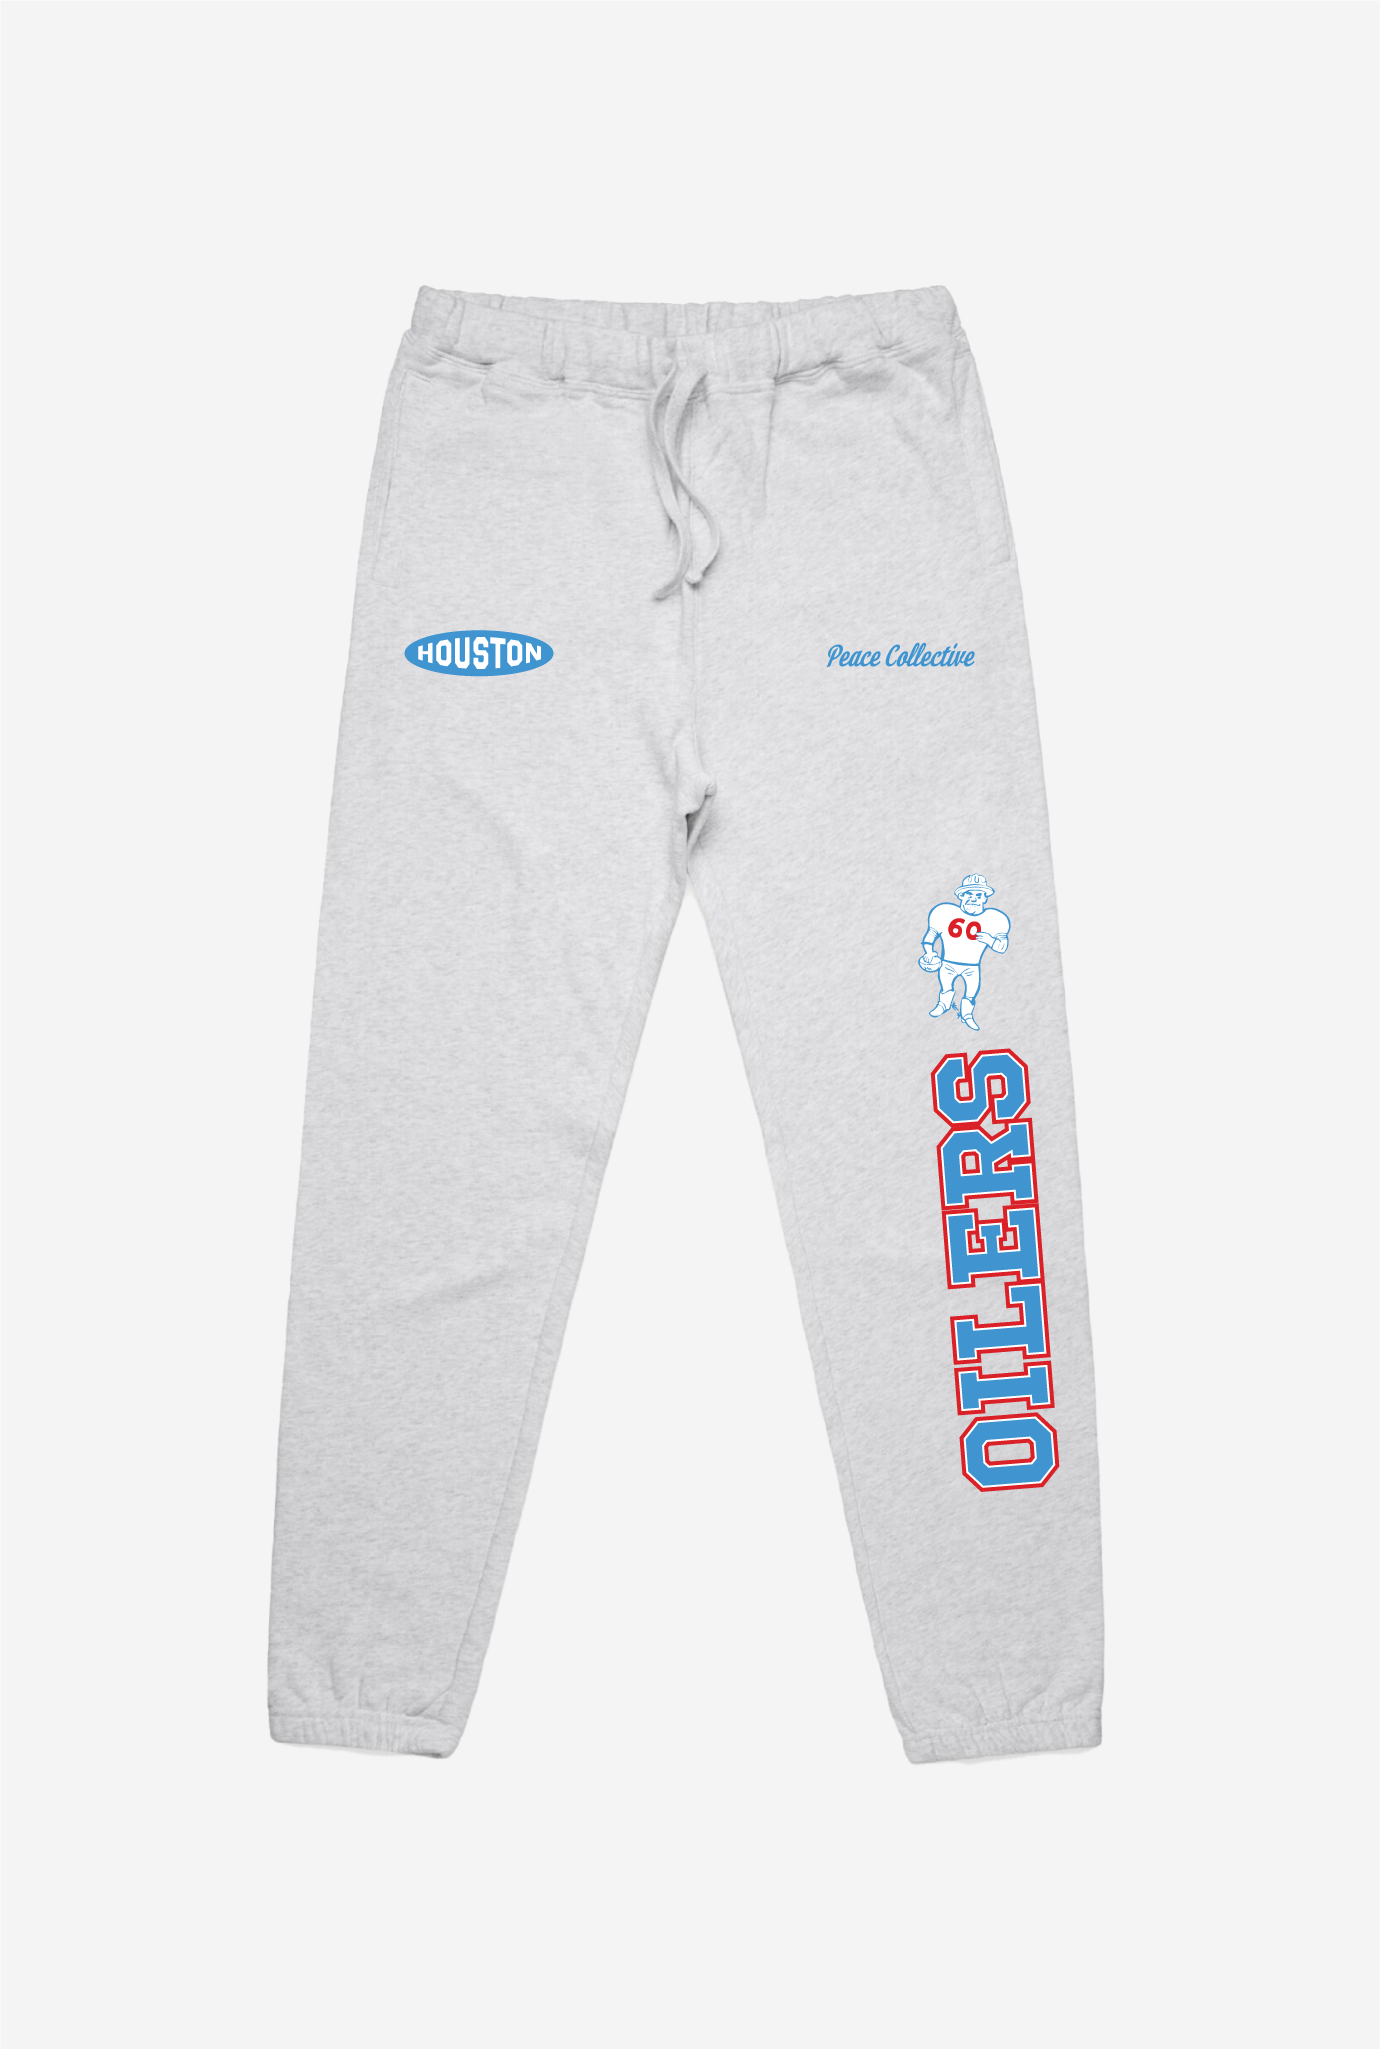 Houston Oilers Washed Graphic Joggers - Ash